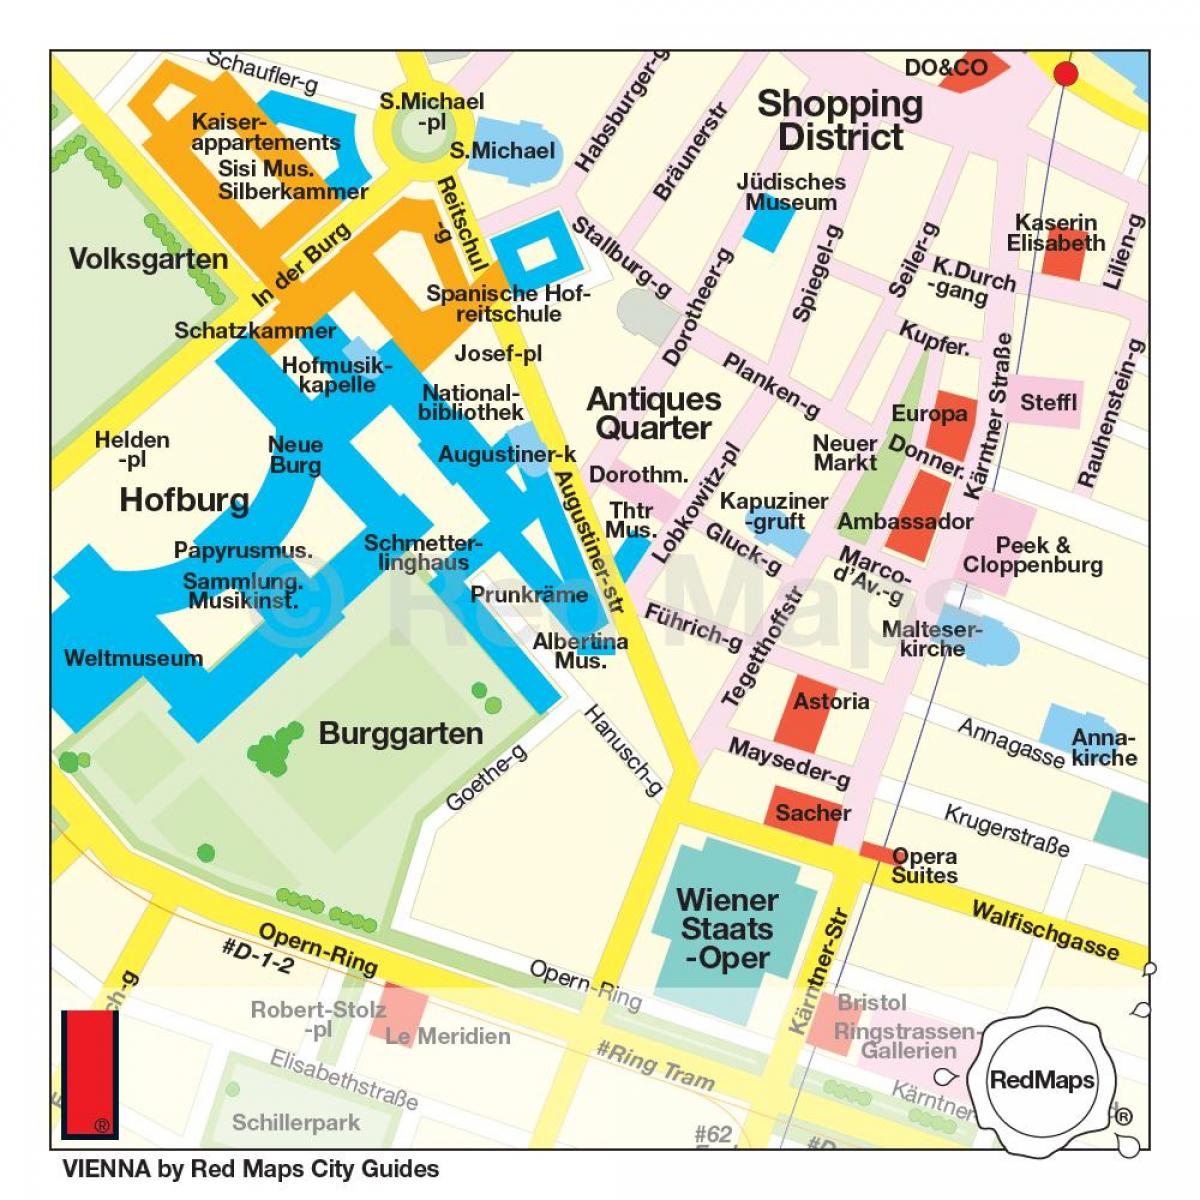 Map of Vienna shopping